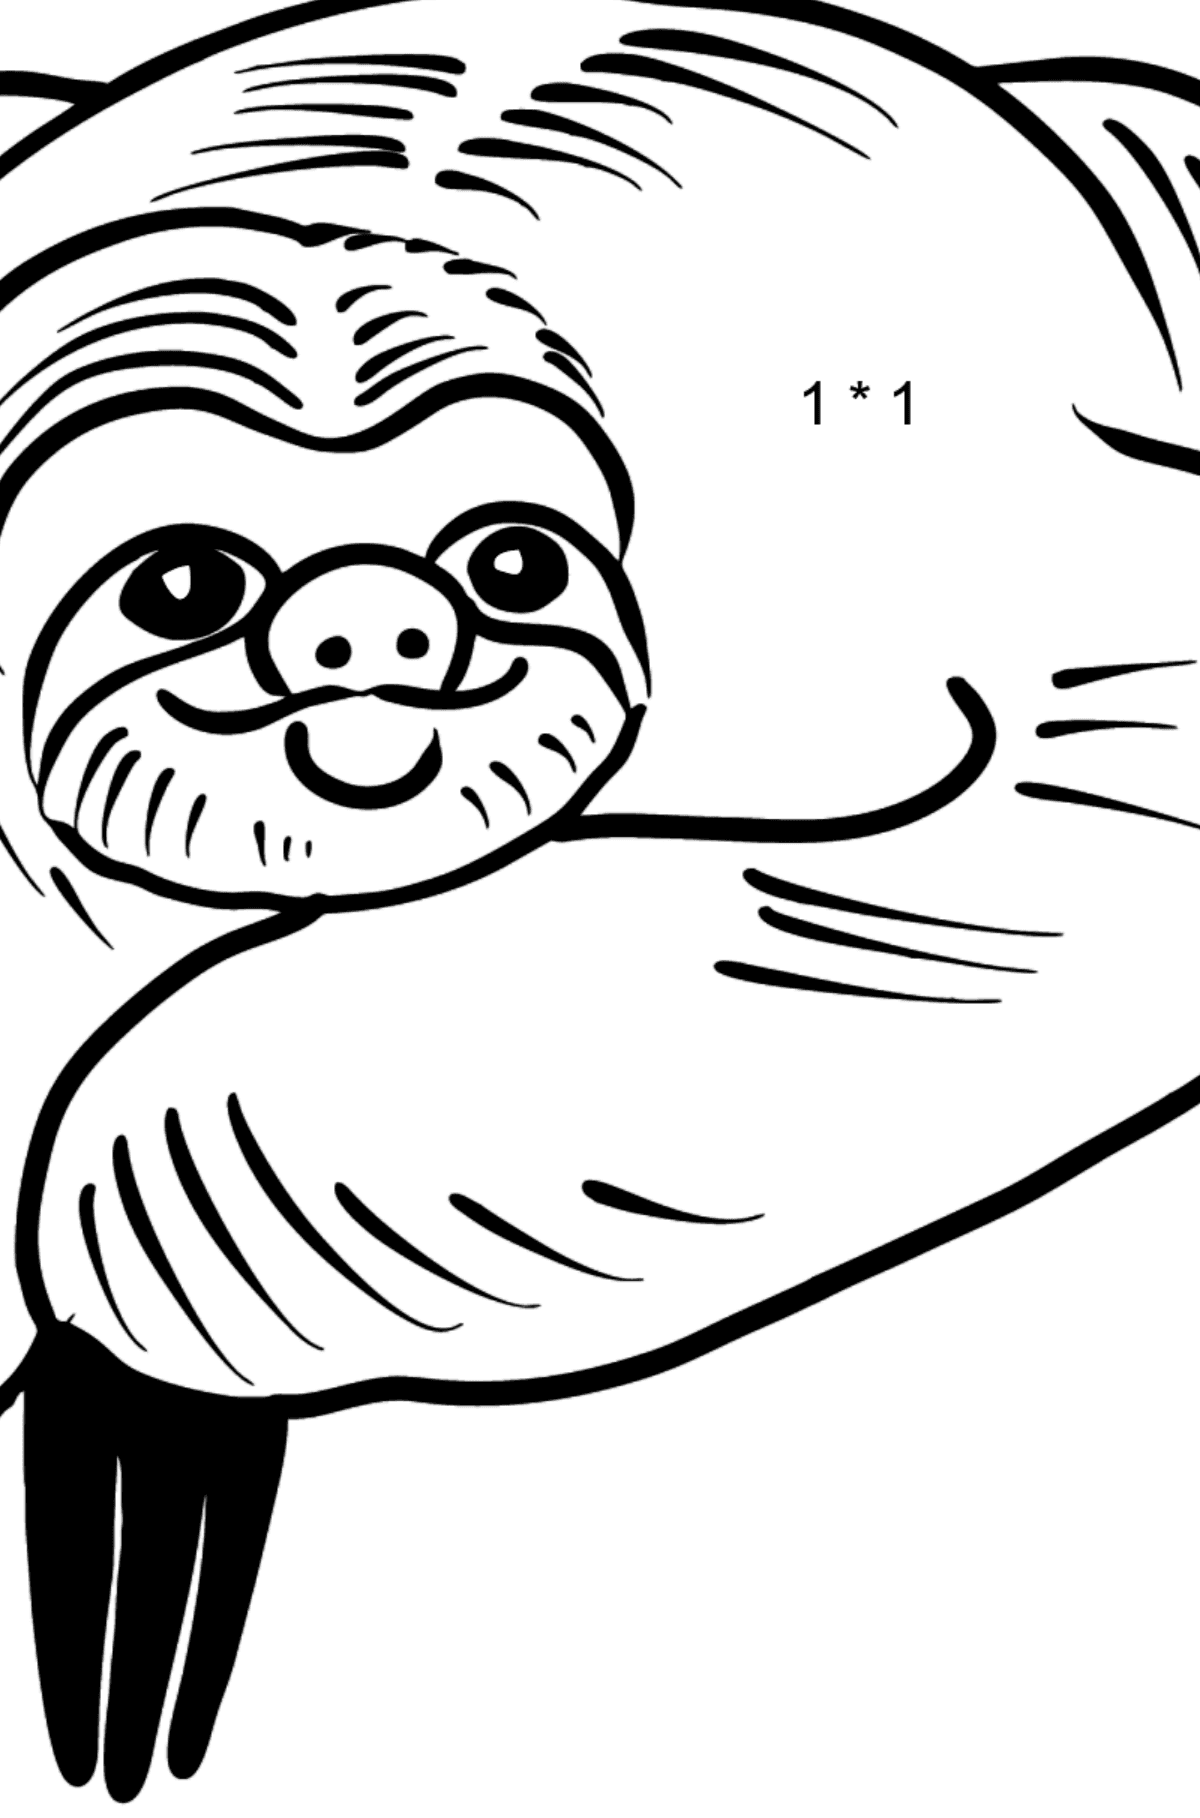 Sloth coloring page - Math Coloring - Multiplication for Kids